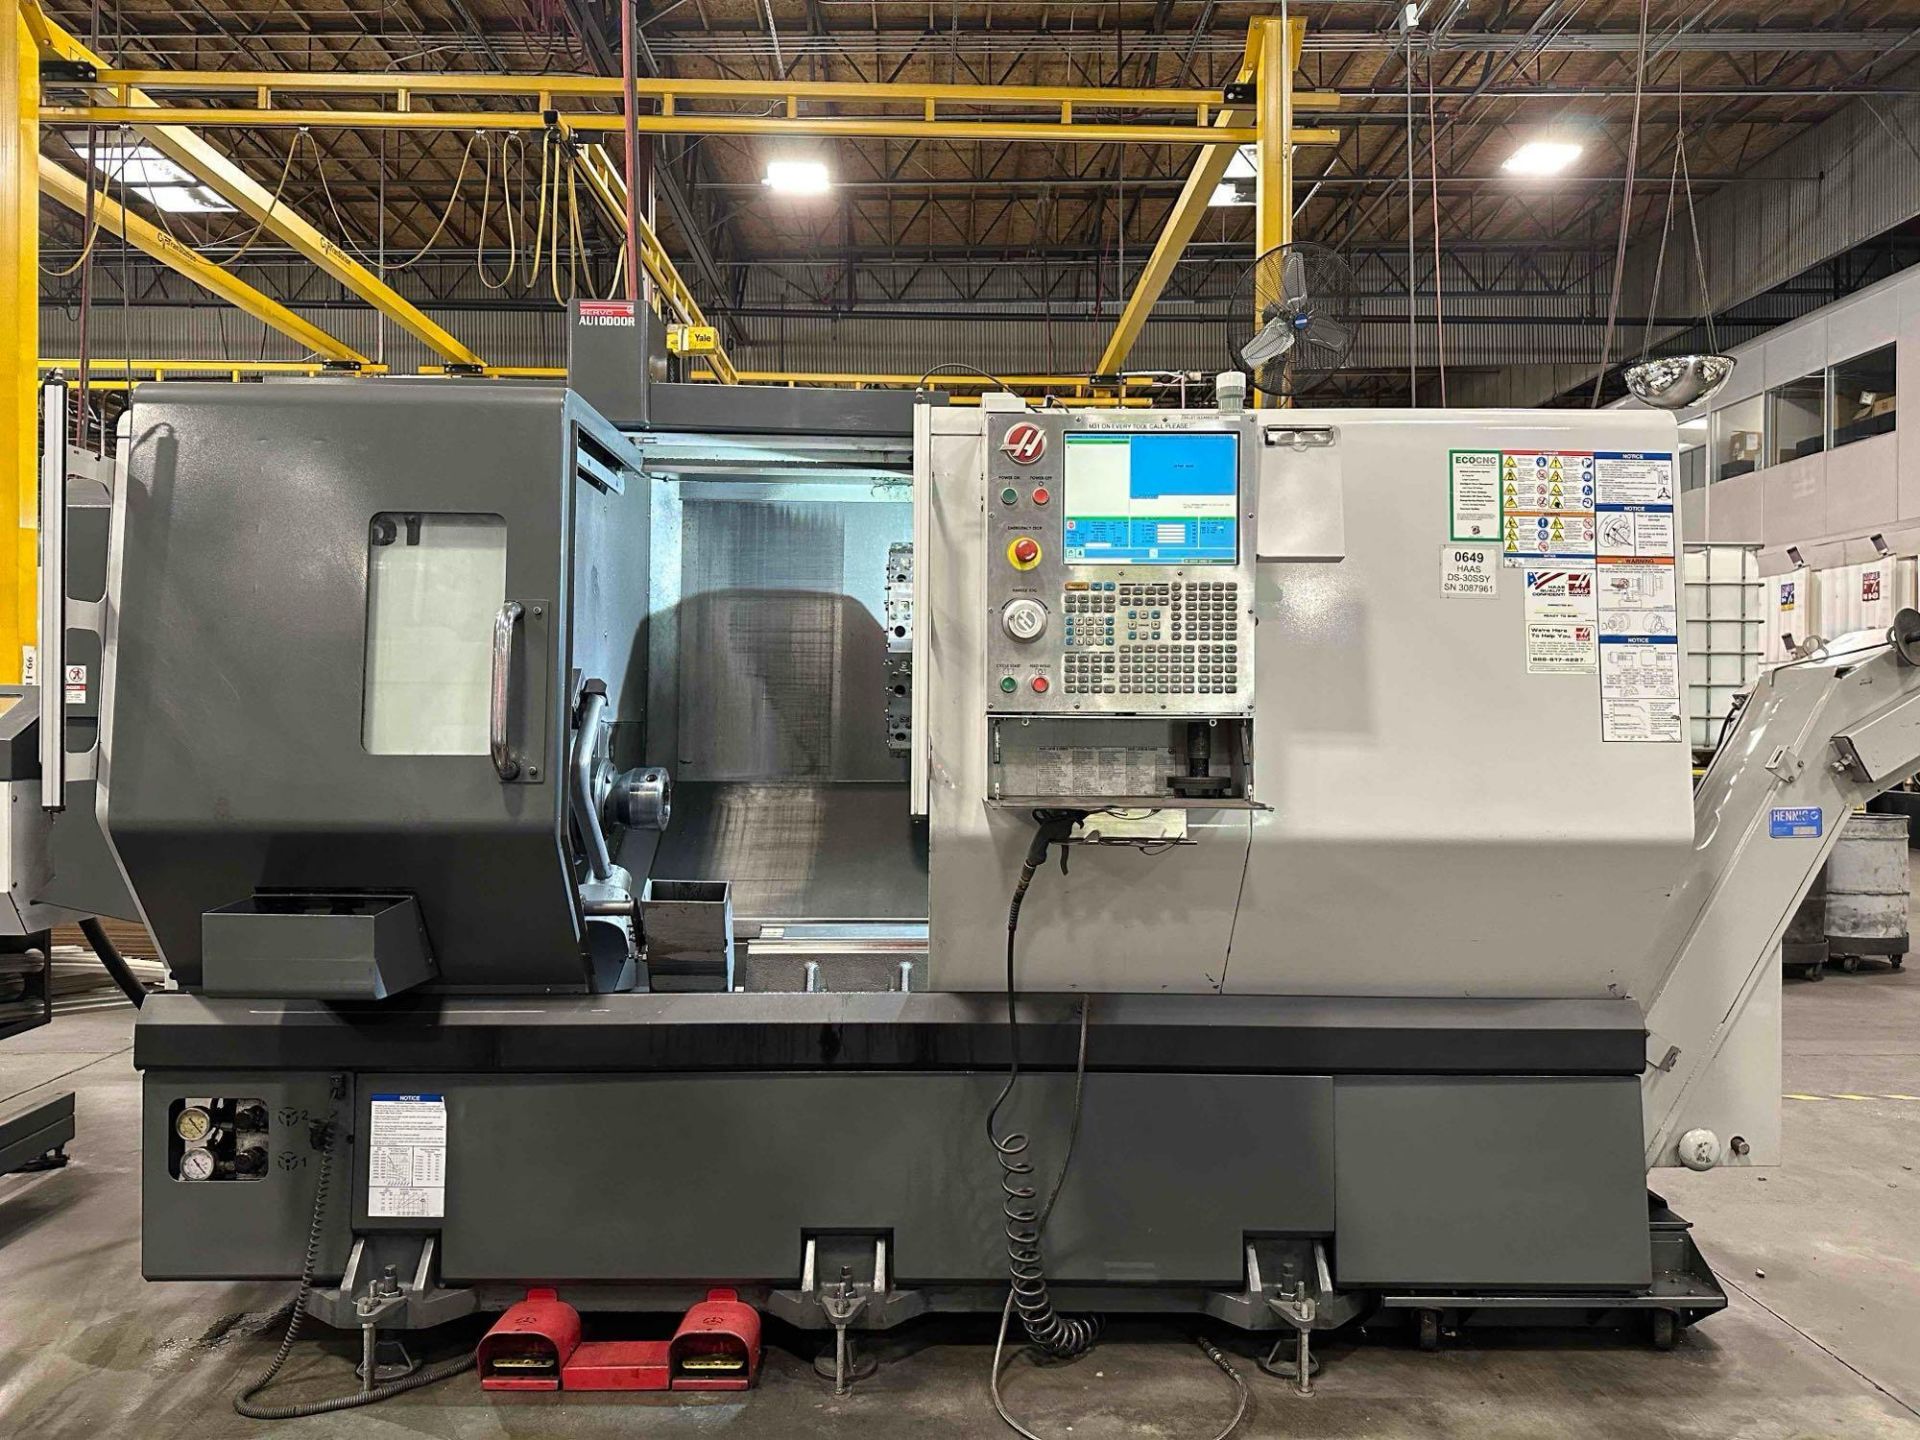 Haas DS-30SSY CNC Lathe, 24-Station Turret, s/n 3087961, 2011 *TOOLS NOT INCLUDED* - Image 2 of 12